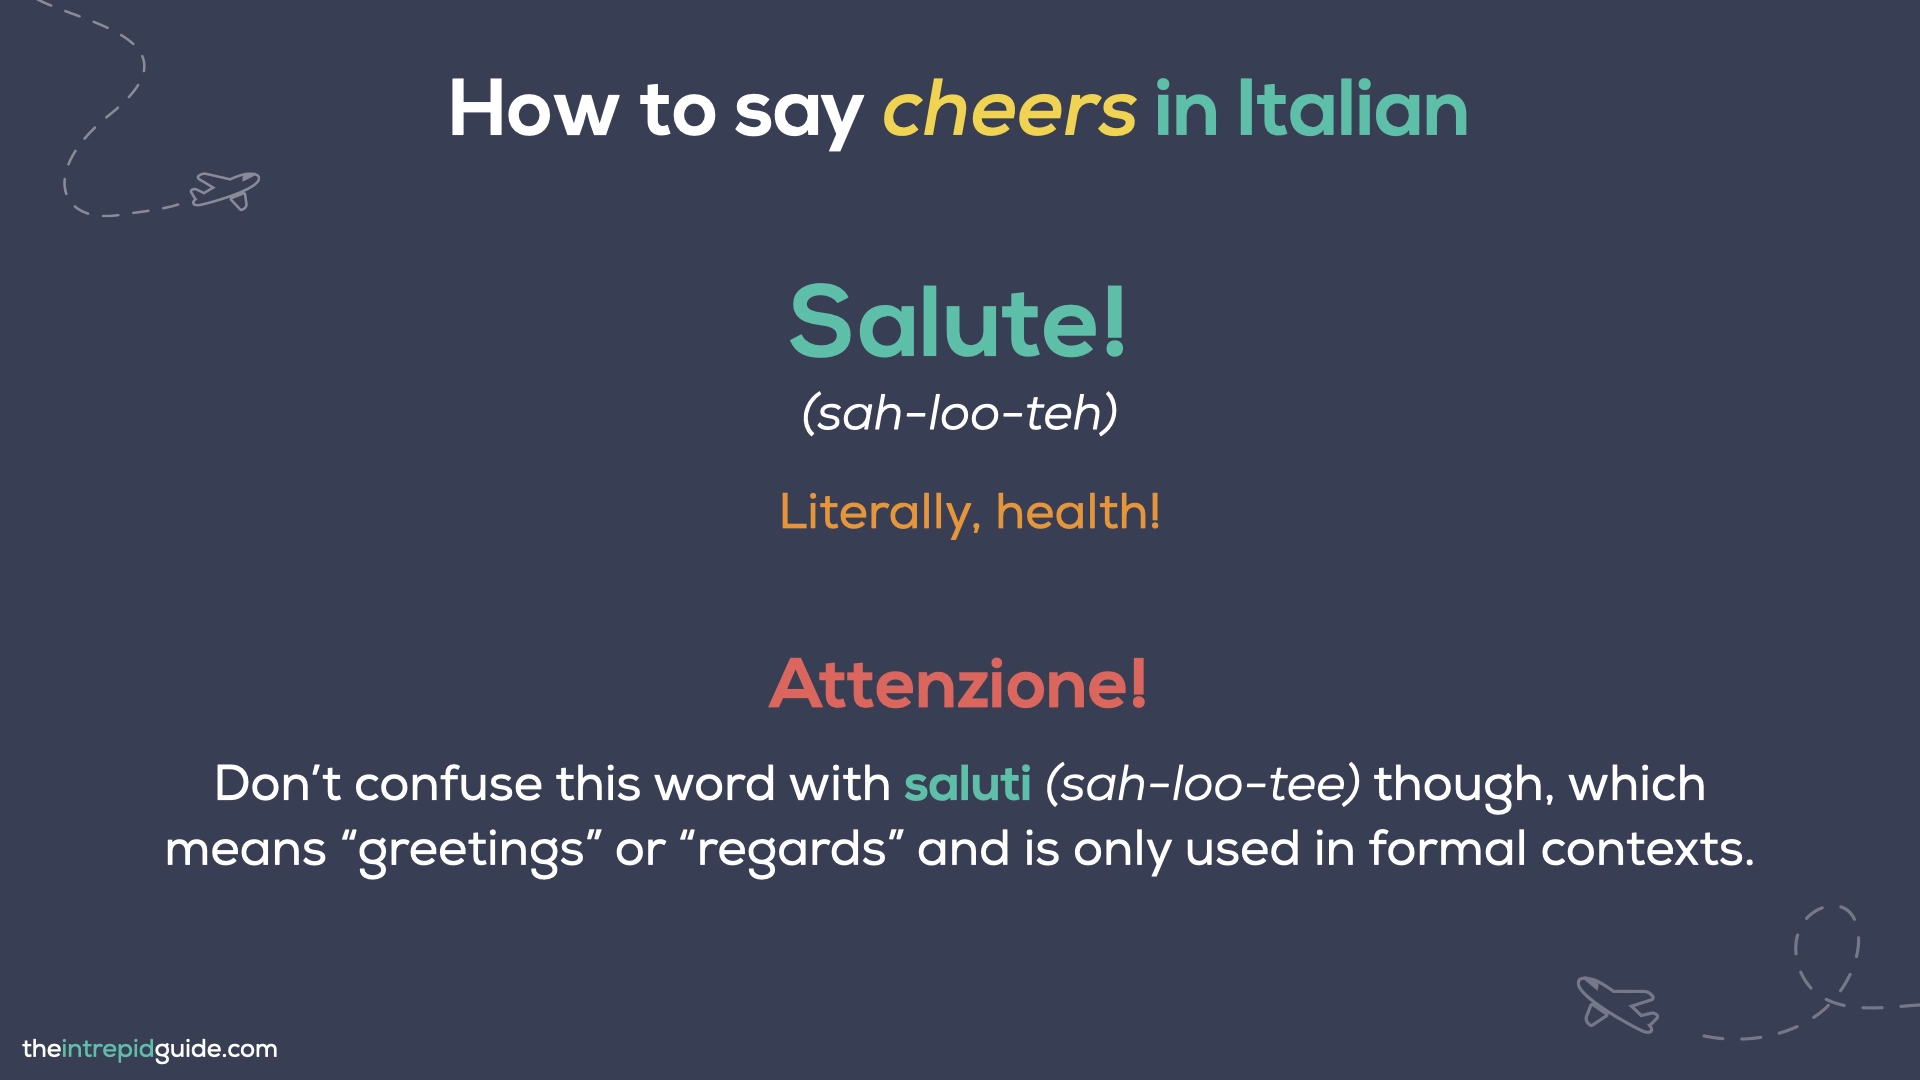 How to say cheers in Italian - Salute